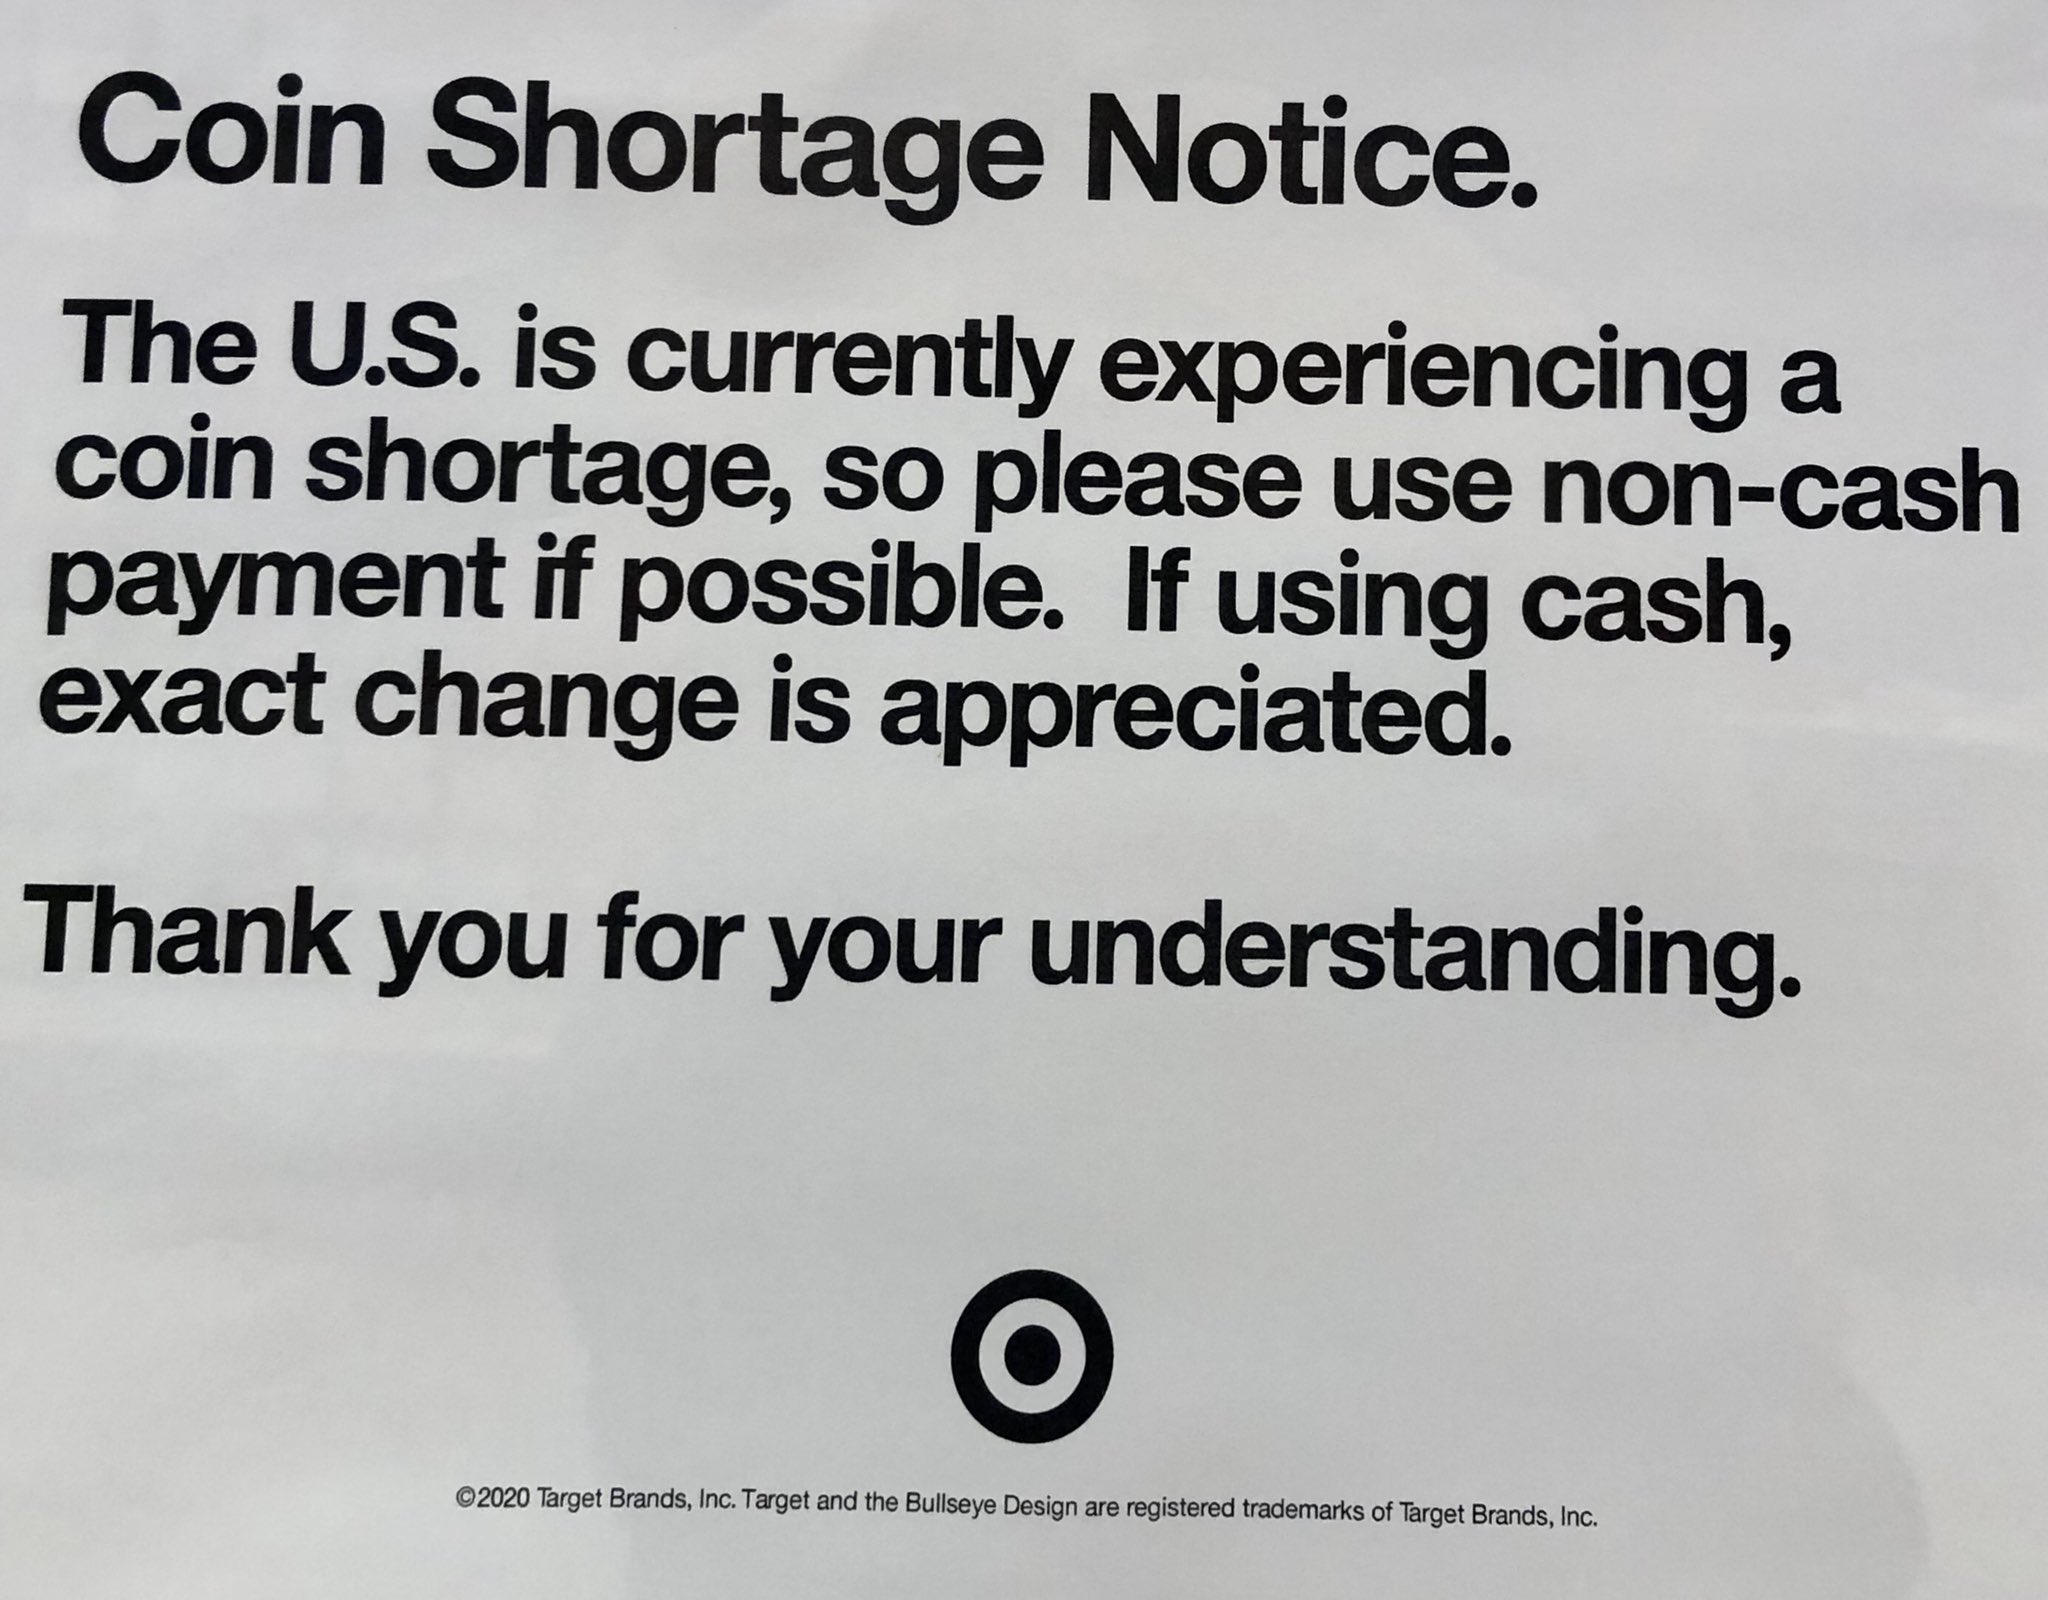 You-think-crypto-isn’t-ready-to-be-money?-consider-the-coin-shortage